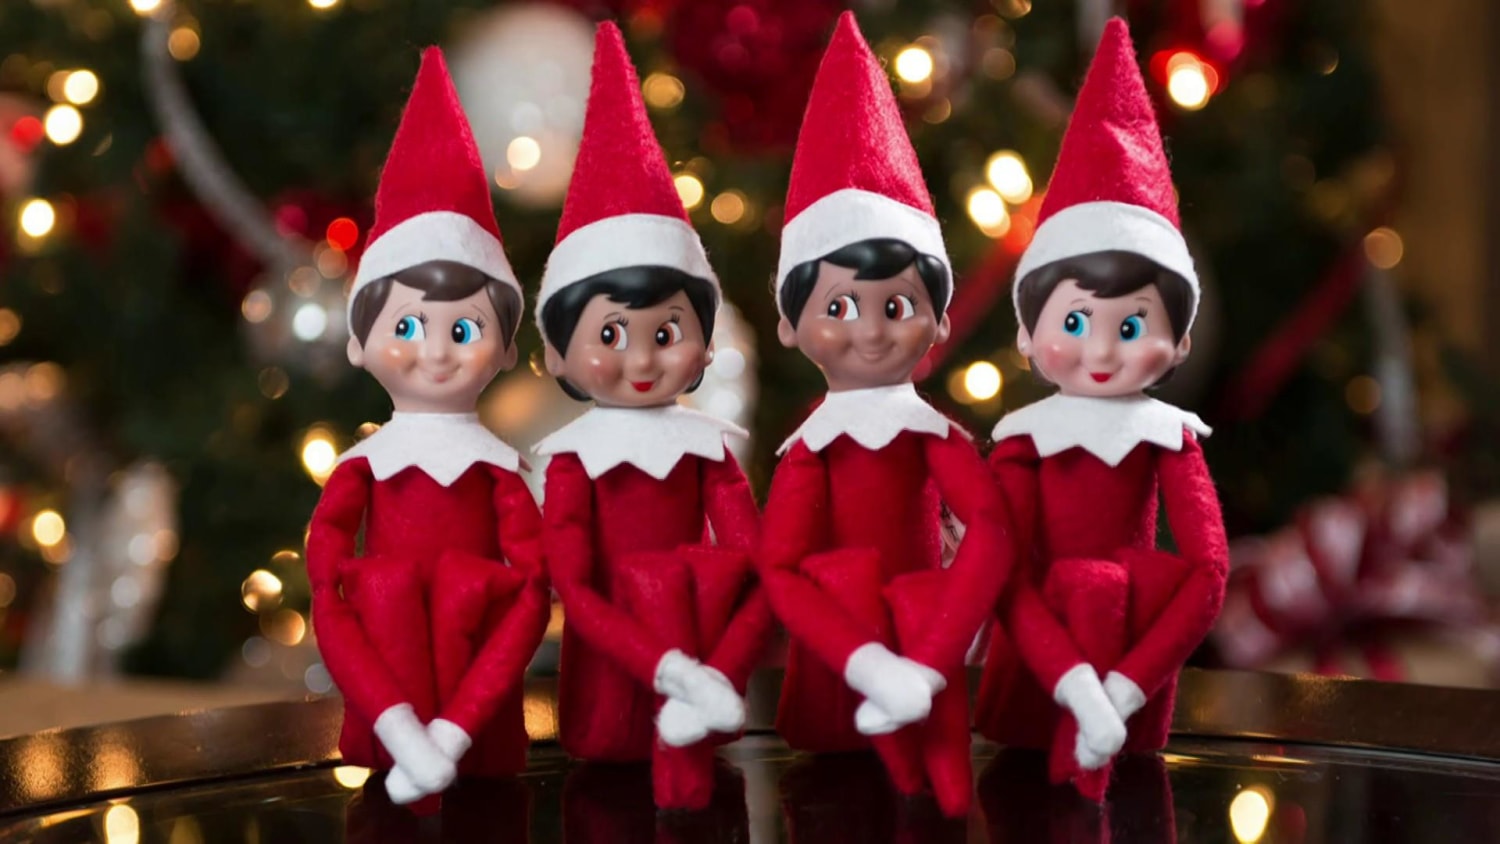 Elf On The Shelf Pictures  Download Free Images on Unsplash